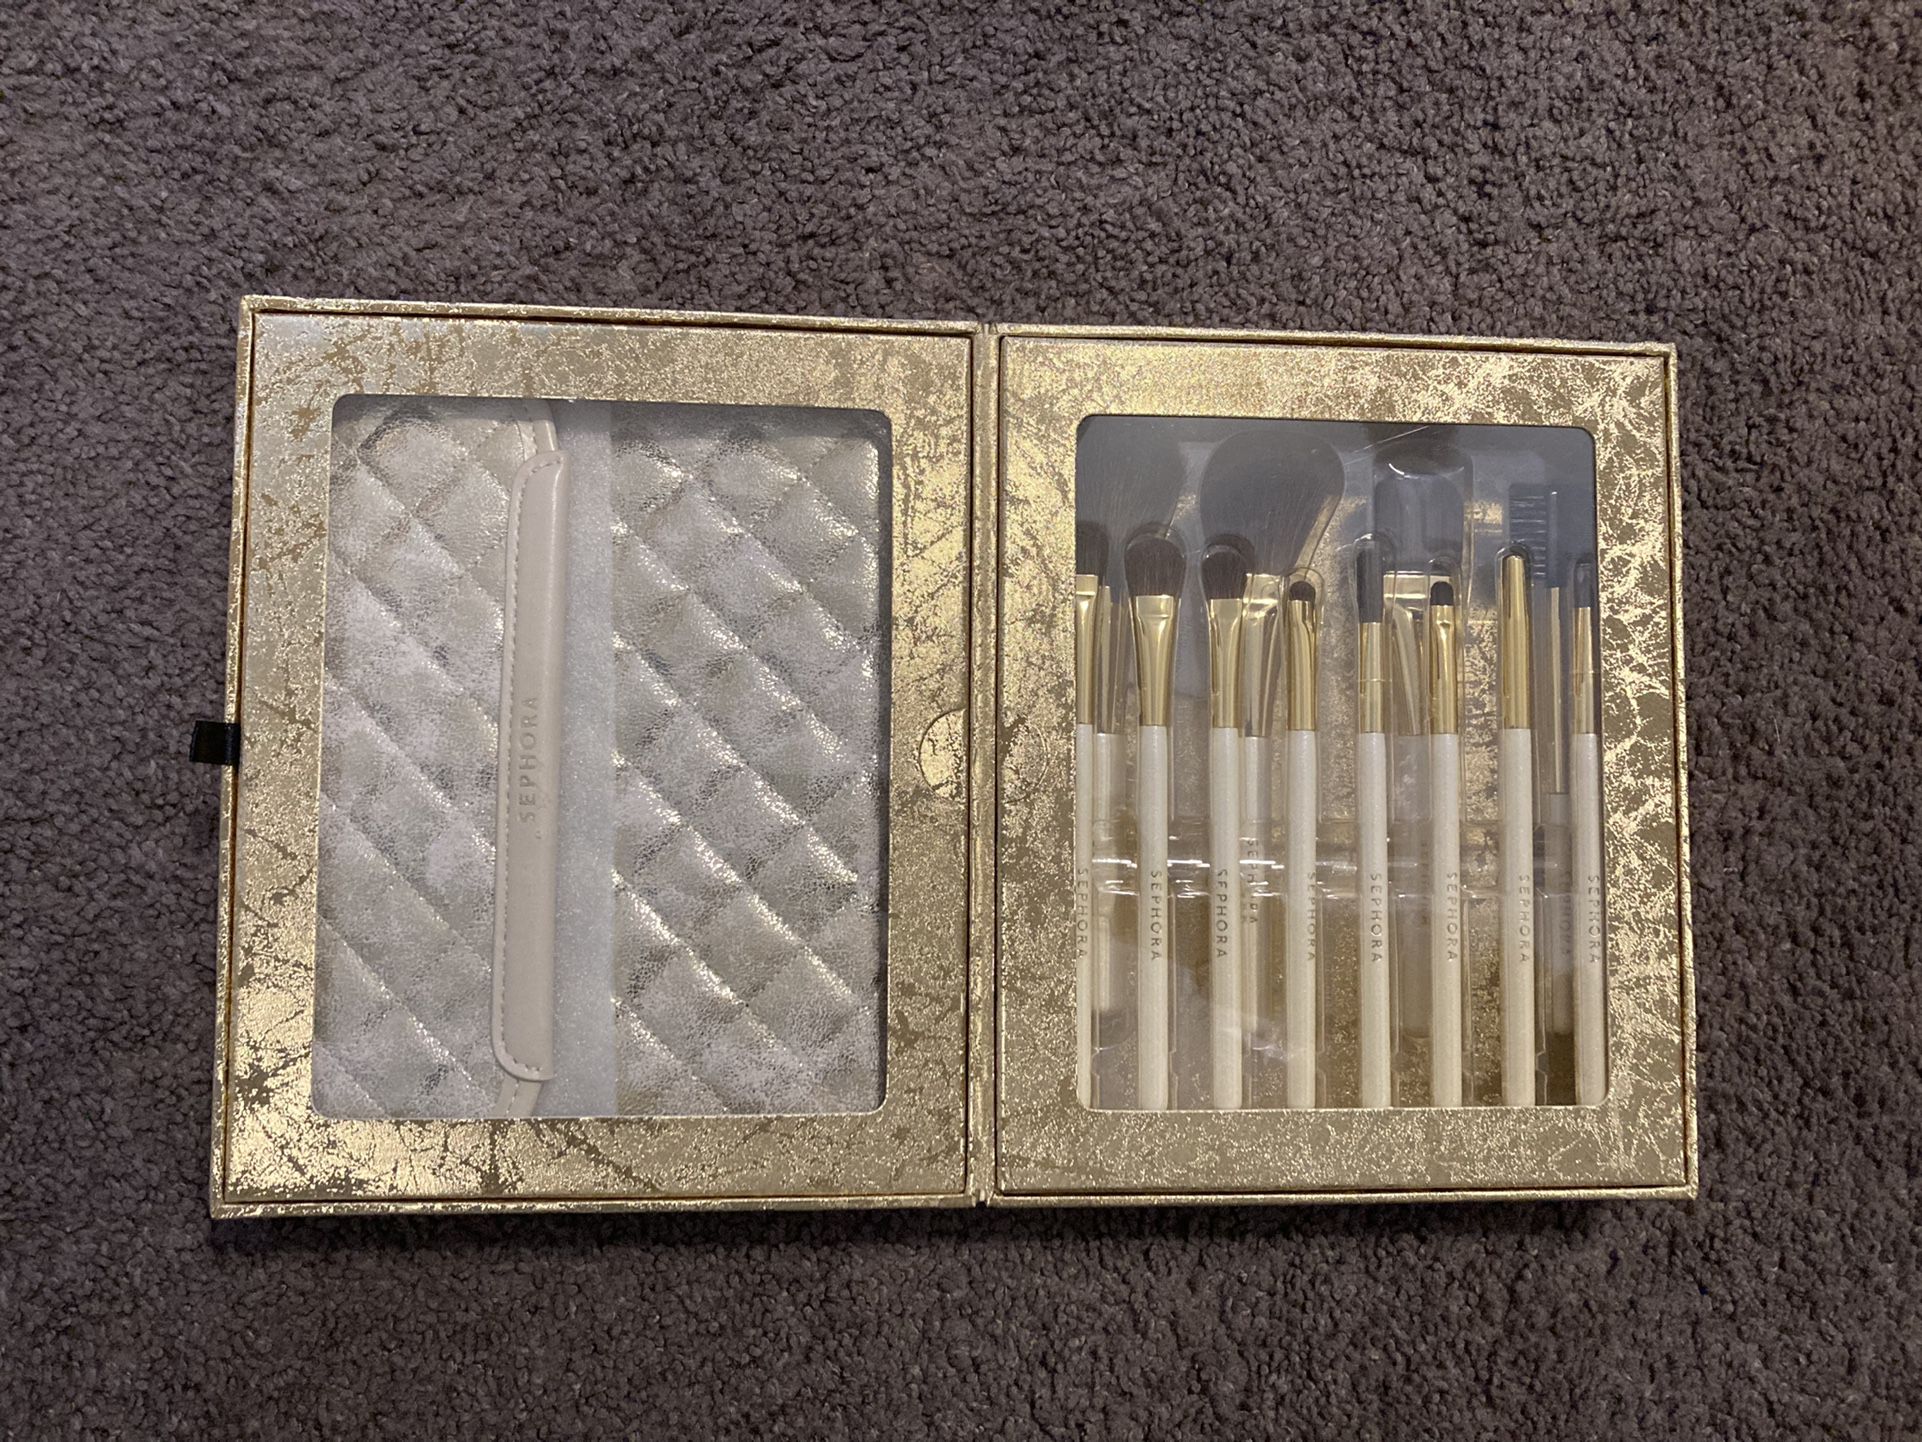 Sephora makeup brush Gift Set - New In box - 12 Brushes, Pouch, And Decorative Box